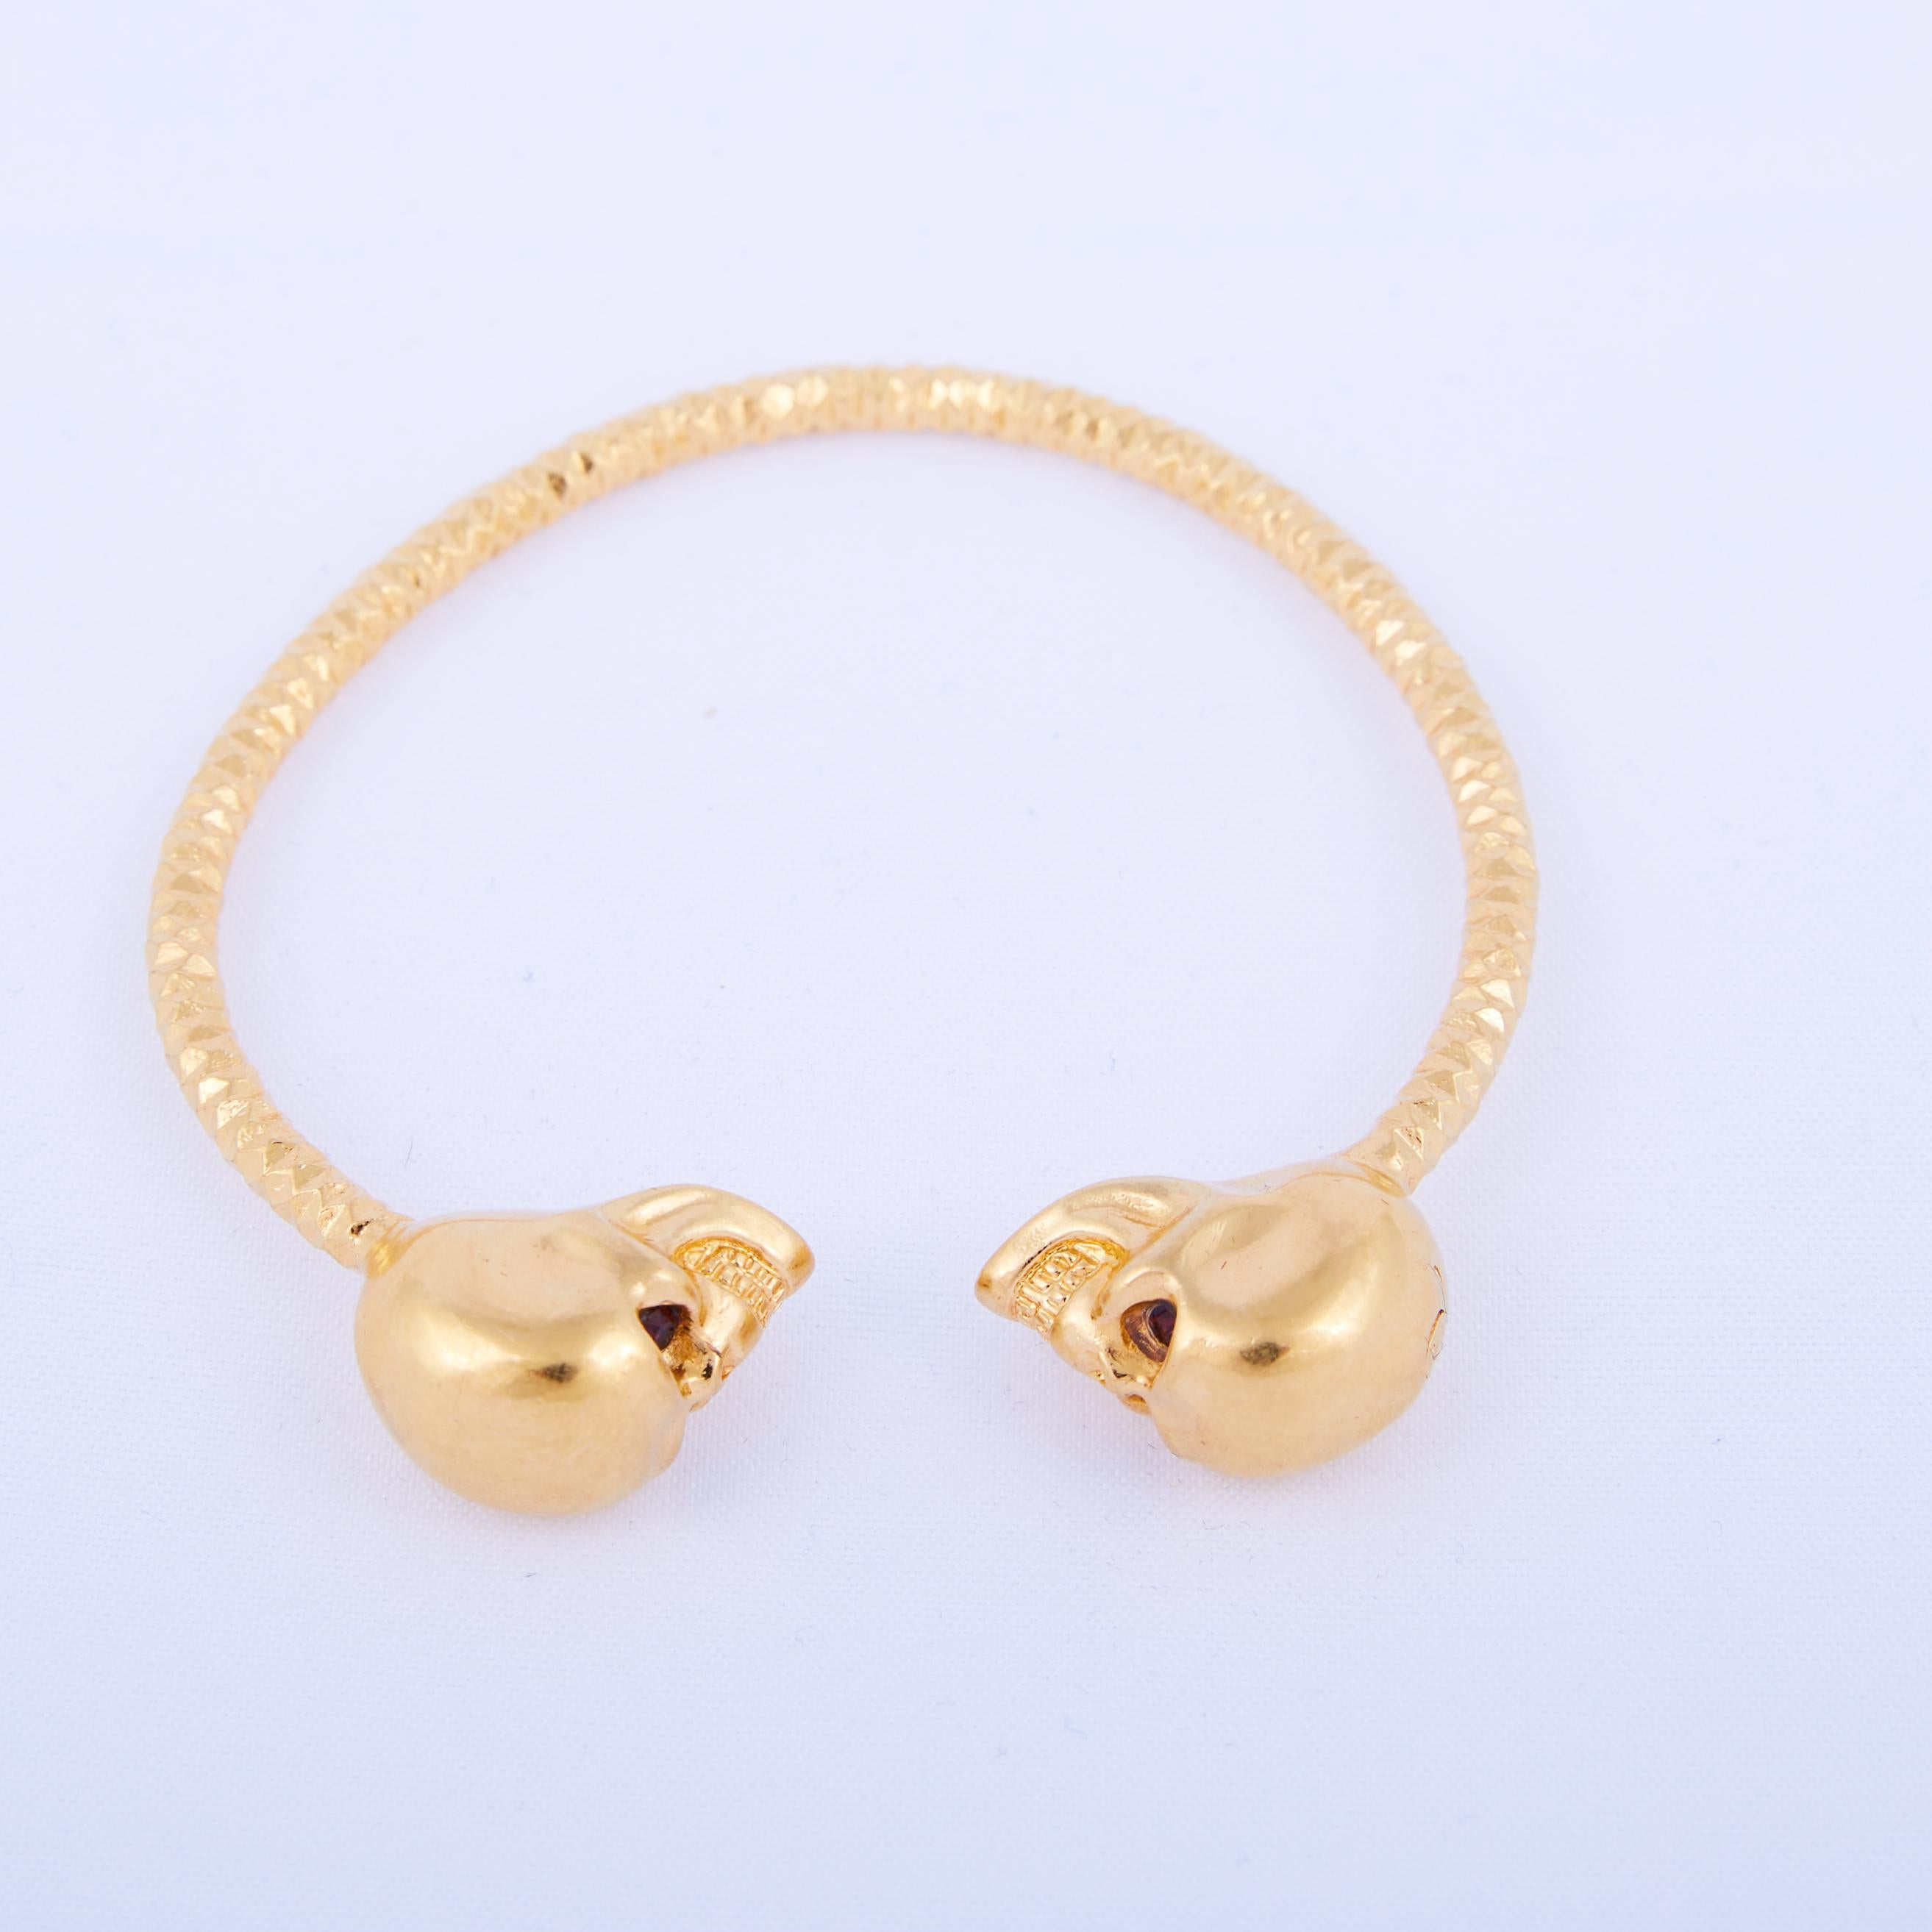 COLOR: Gold tone
MATERIAL: Foldable metal
CIRCUMFERENCE: 8.5